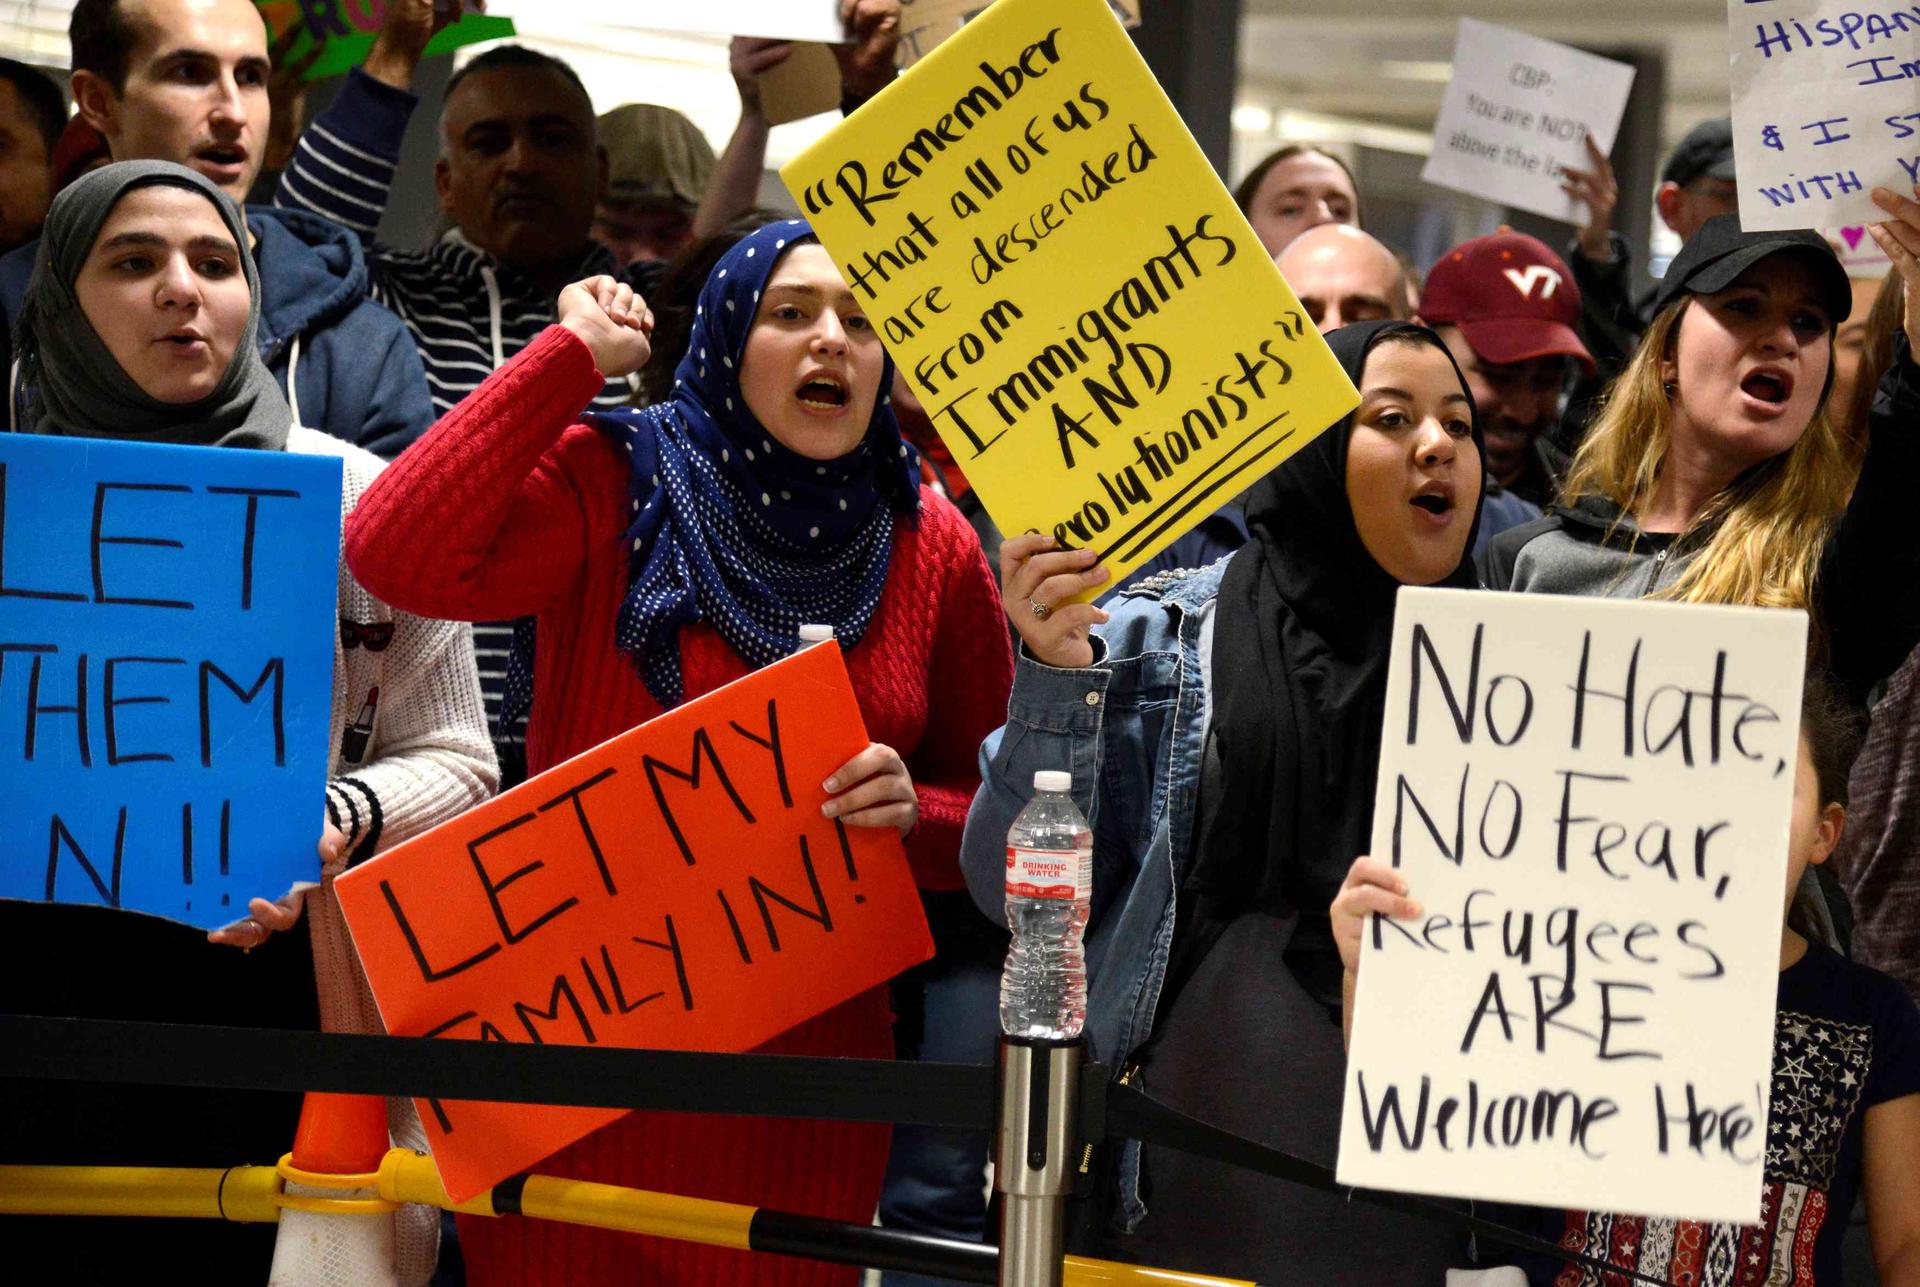 Dozens of pro-immigration demonstrators cheer and hold signs as international passengers arrive at Dulles International Airport